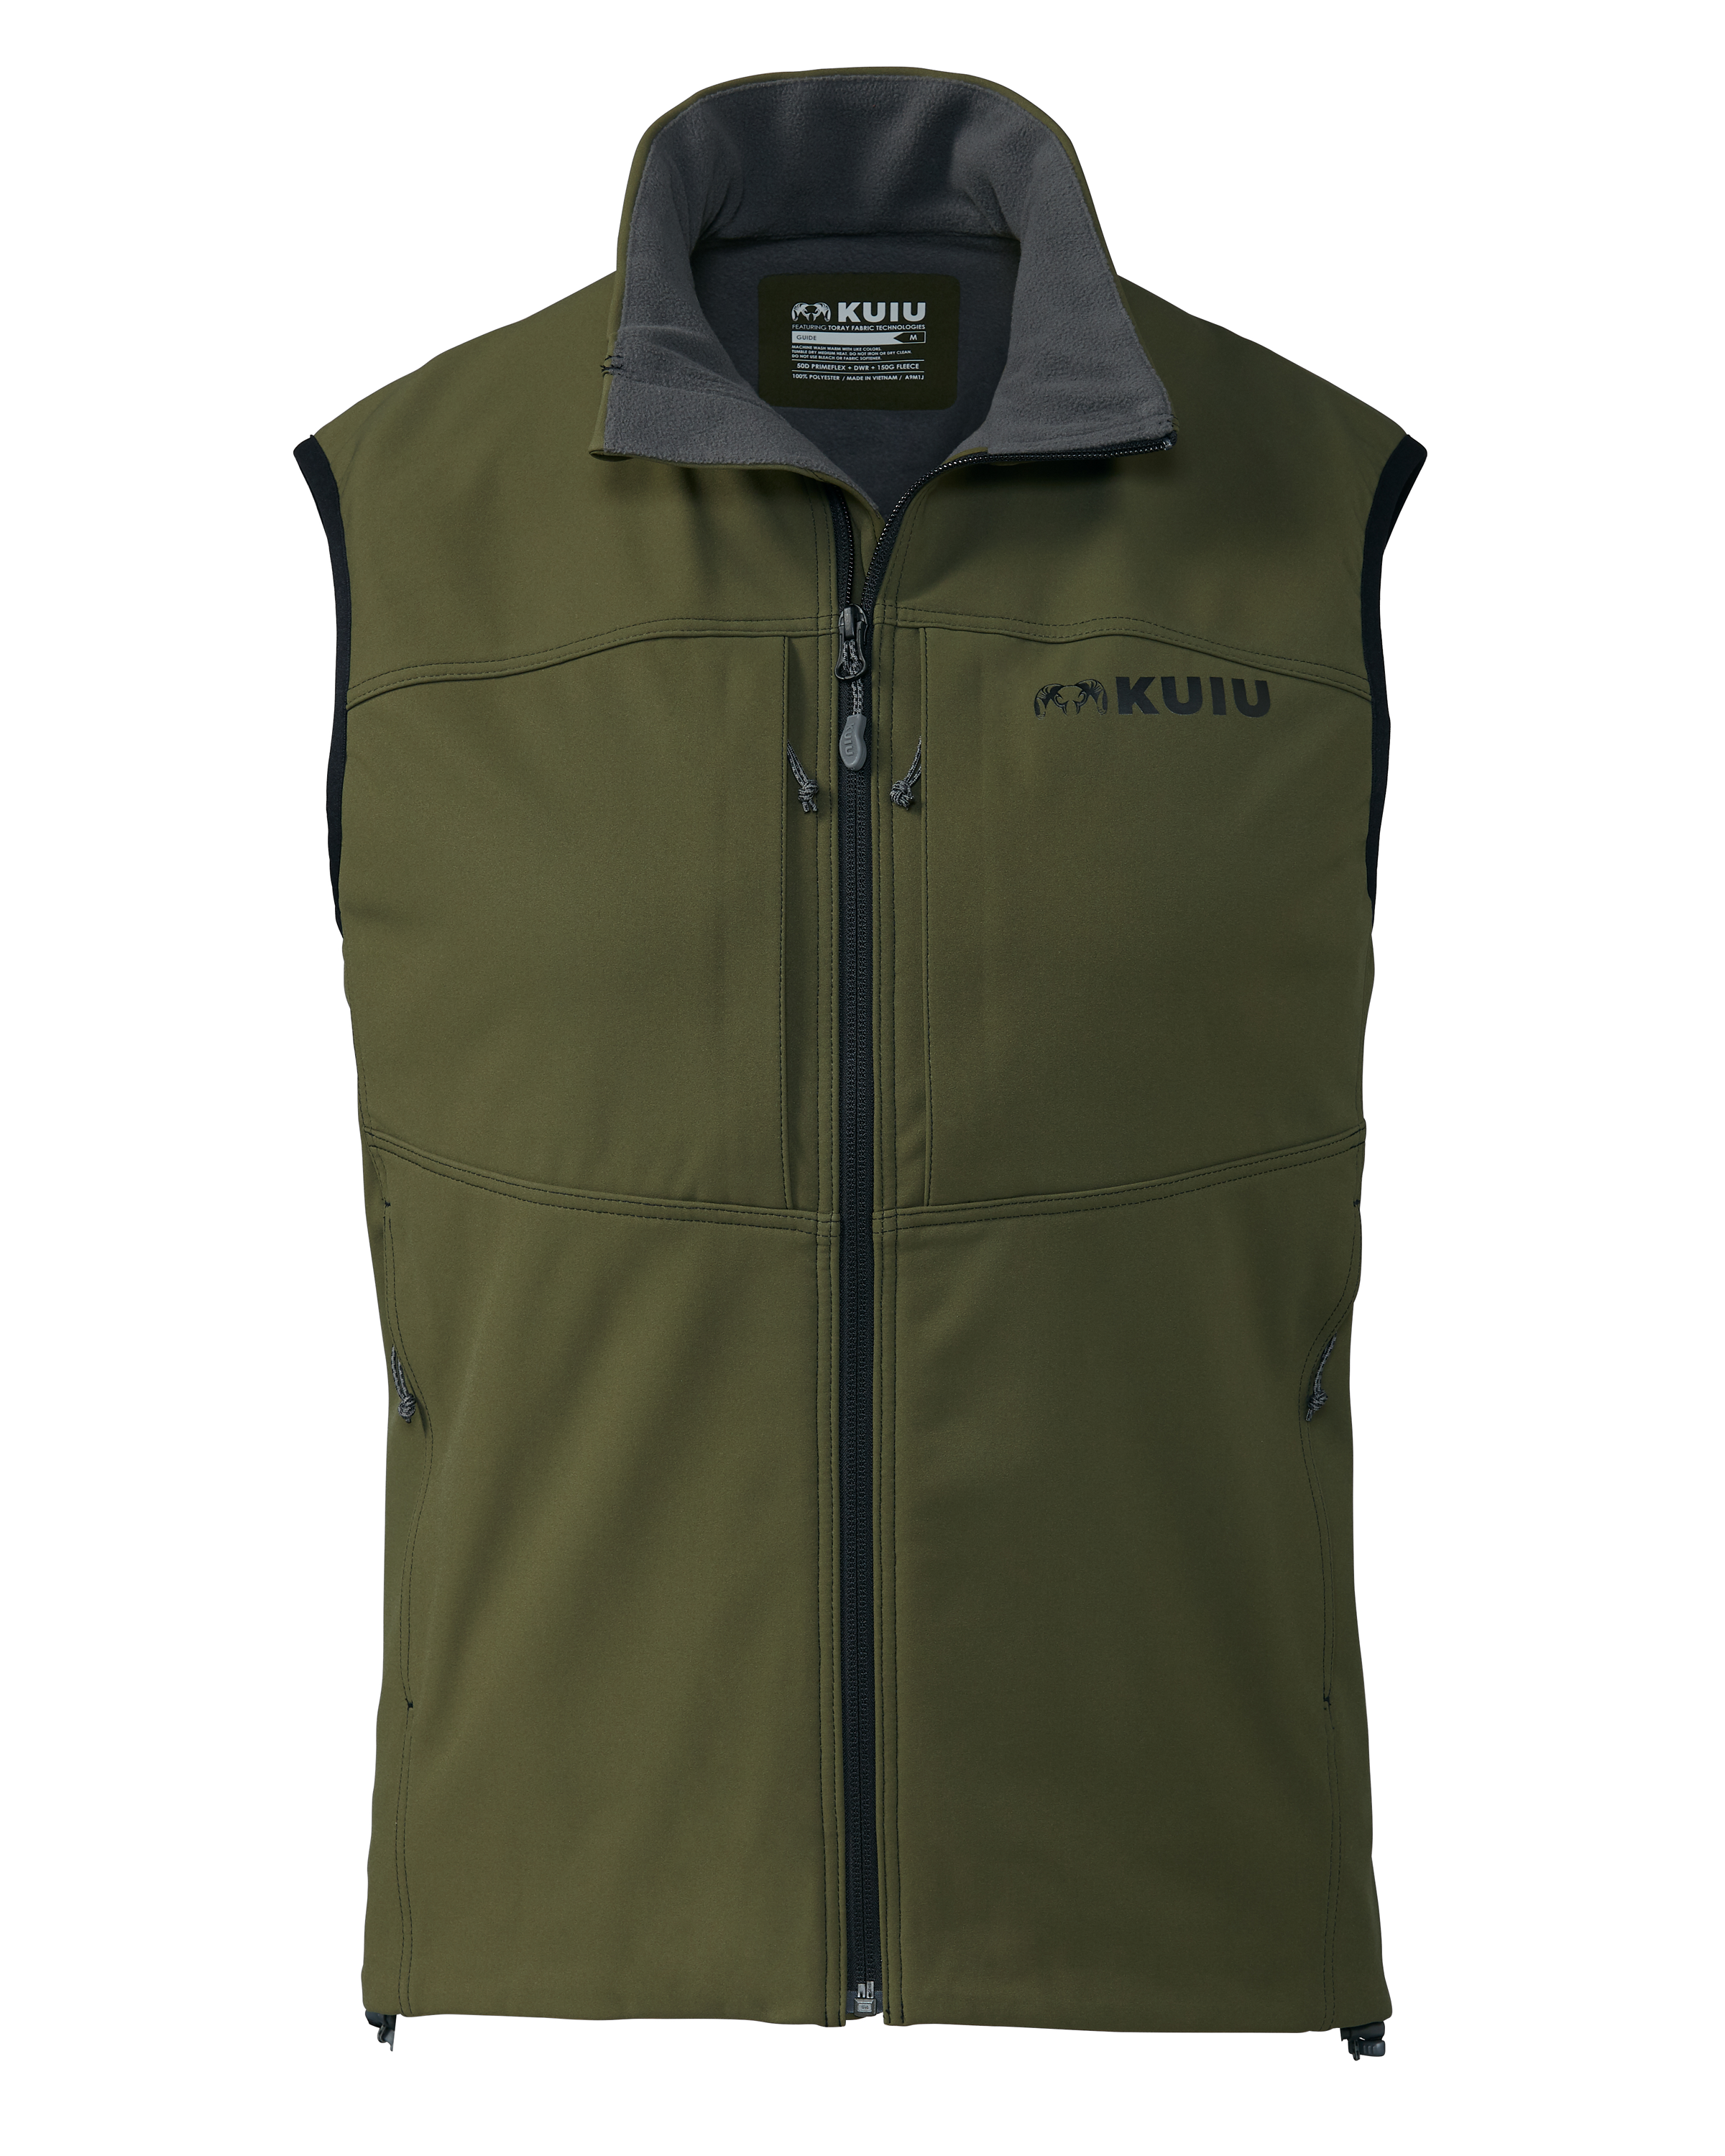 KUIU Guide DCS Hunting Vest in Olive | Size 3XL